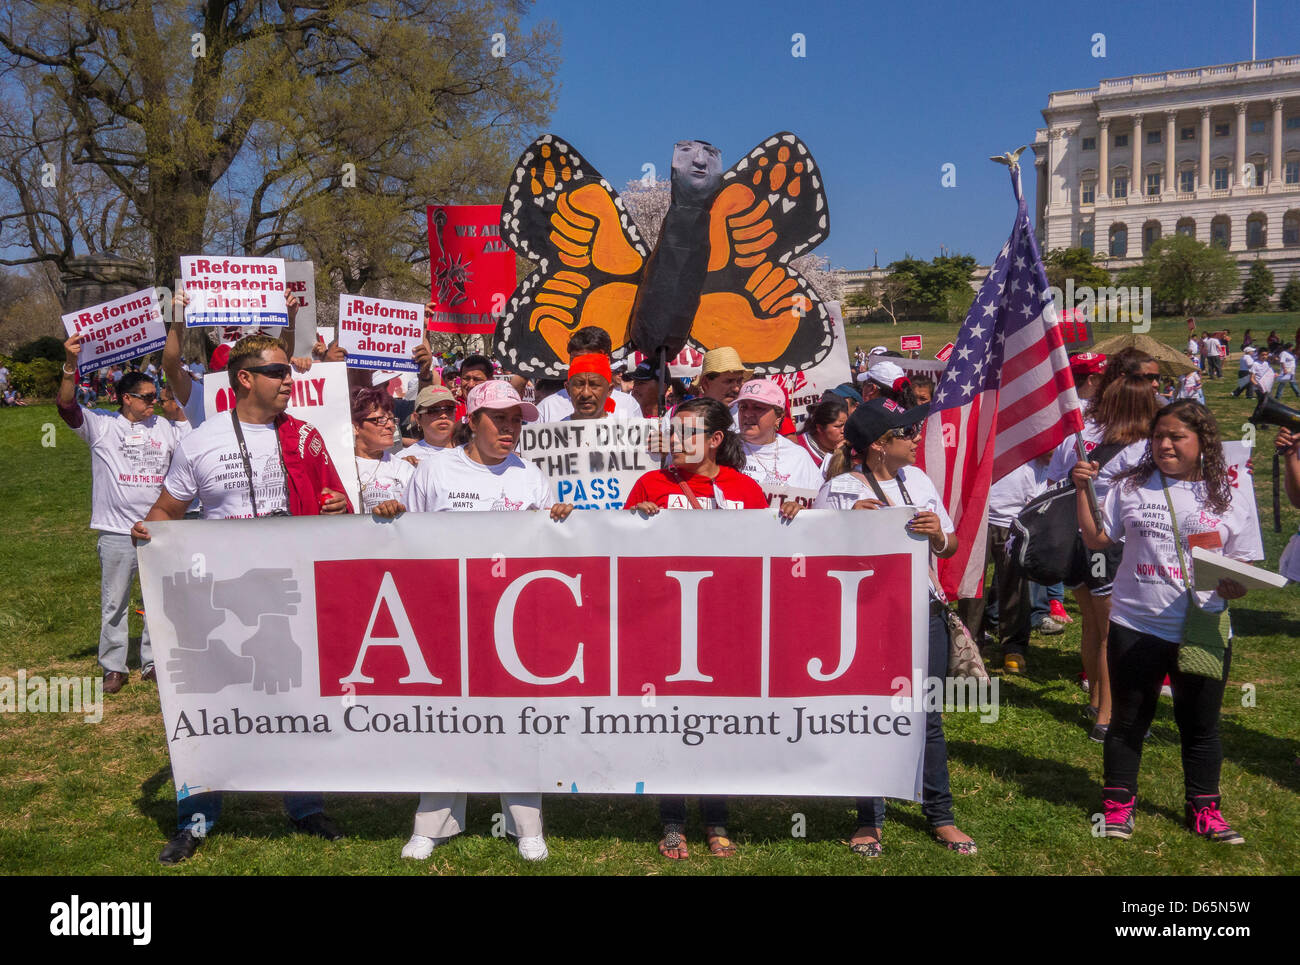 Washington DC, USA. 10th April 2013. Protesters from ACIJ hold sign during immigration reform rally at U.S. Capitol. Credit: Rob Crandall / Alamy Live News Stock Photo